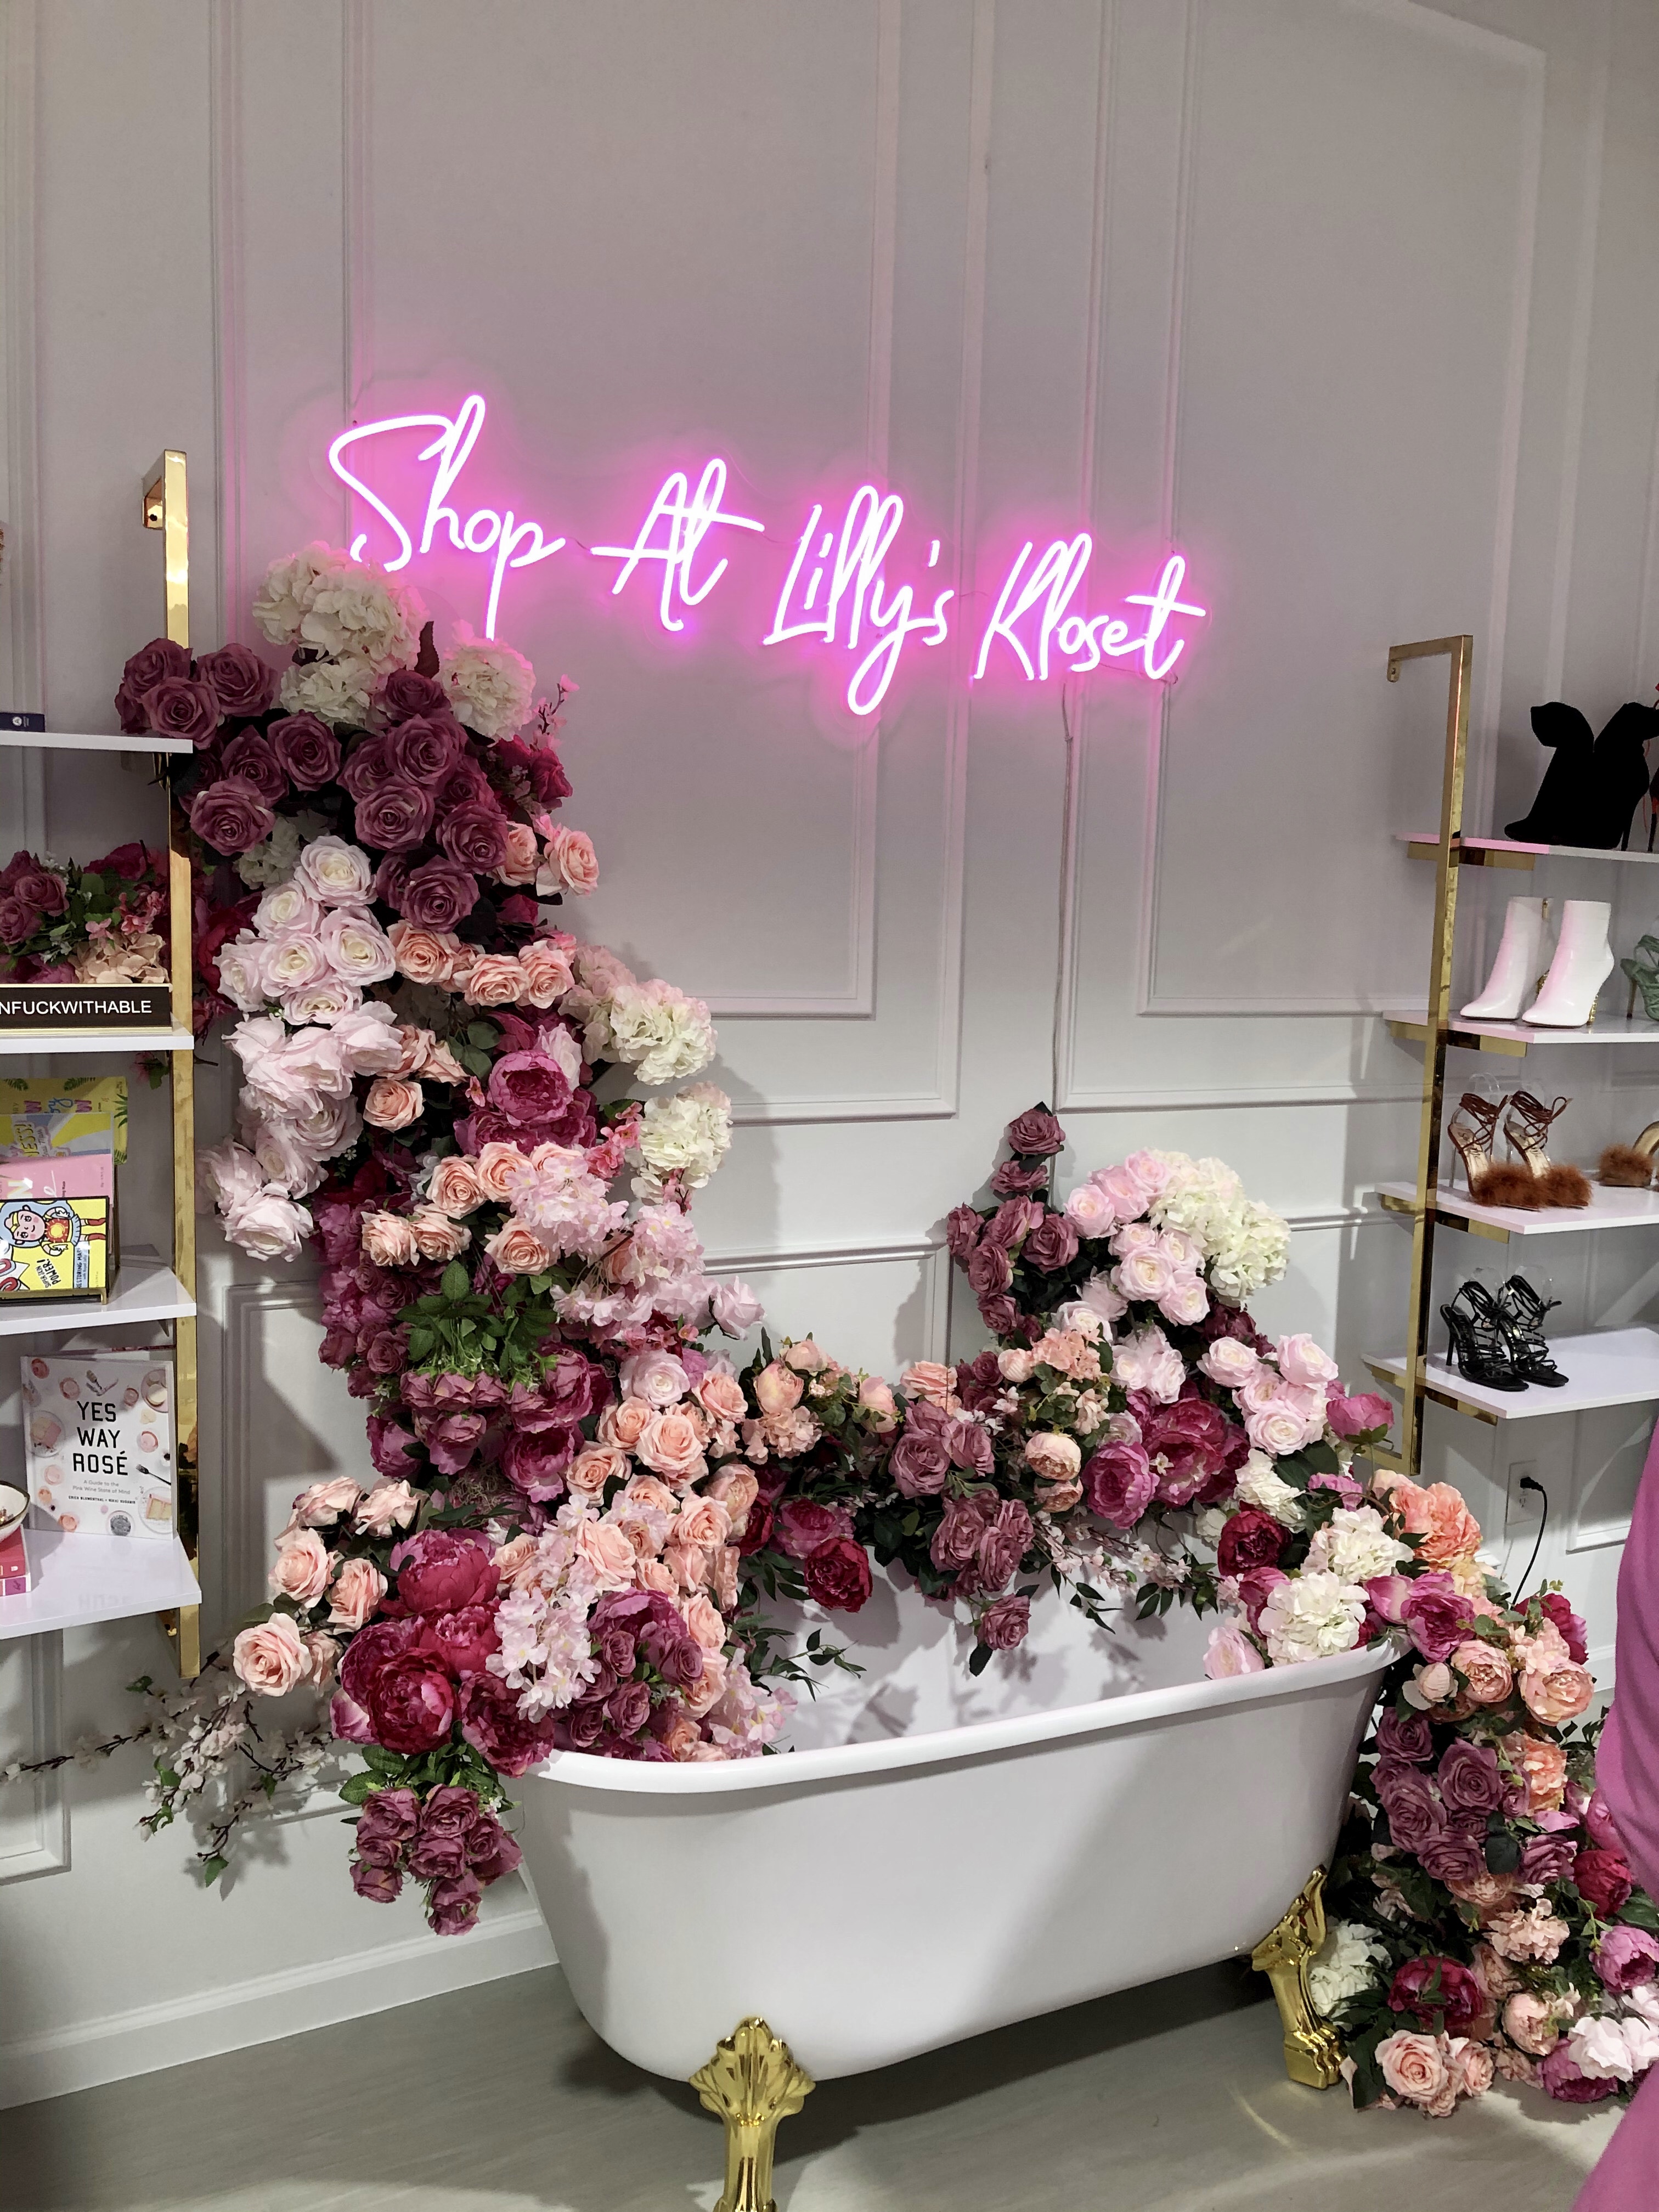 Houston native opens clothing store after near-decade of running popular  online boutique, Lilly's Kloset